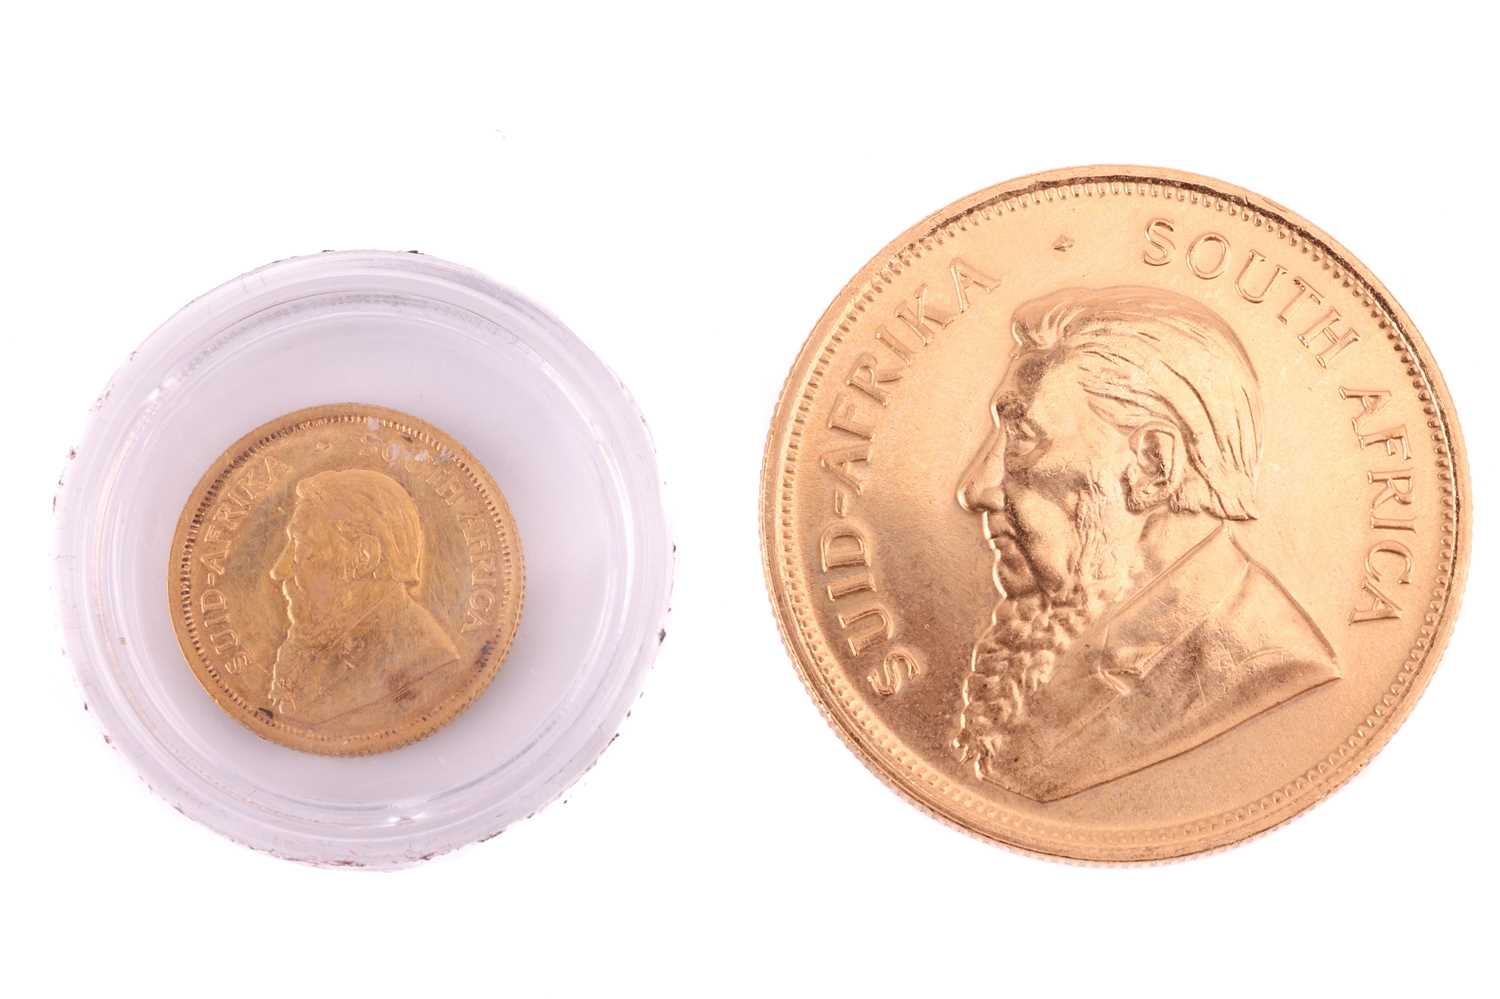 A full 1oz South Africa Krugerrand 1980 gold coin &amp; a 1/10oz South Africa Krugerrand 1985 gold c - Image 2 of 2